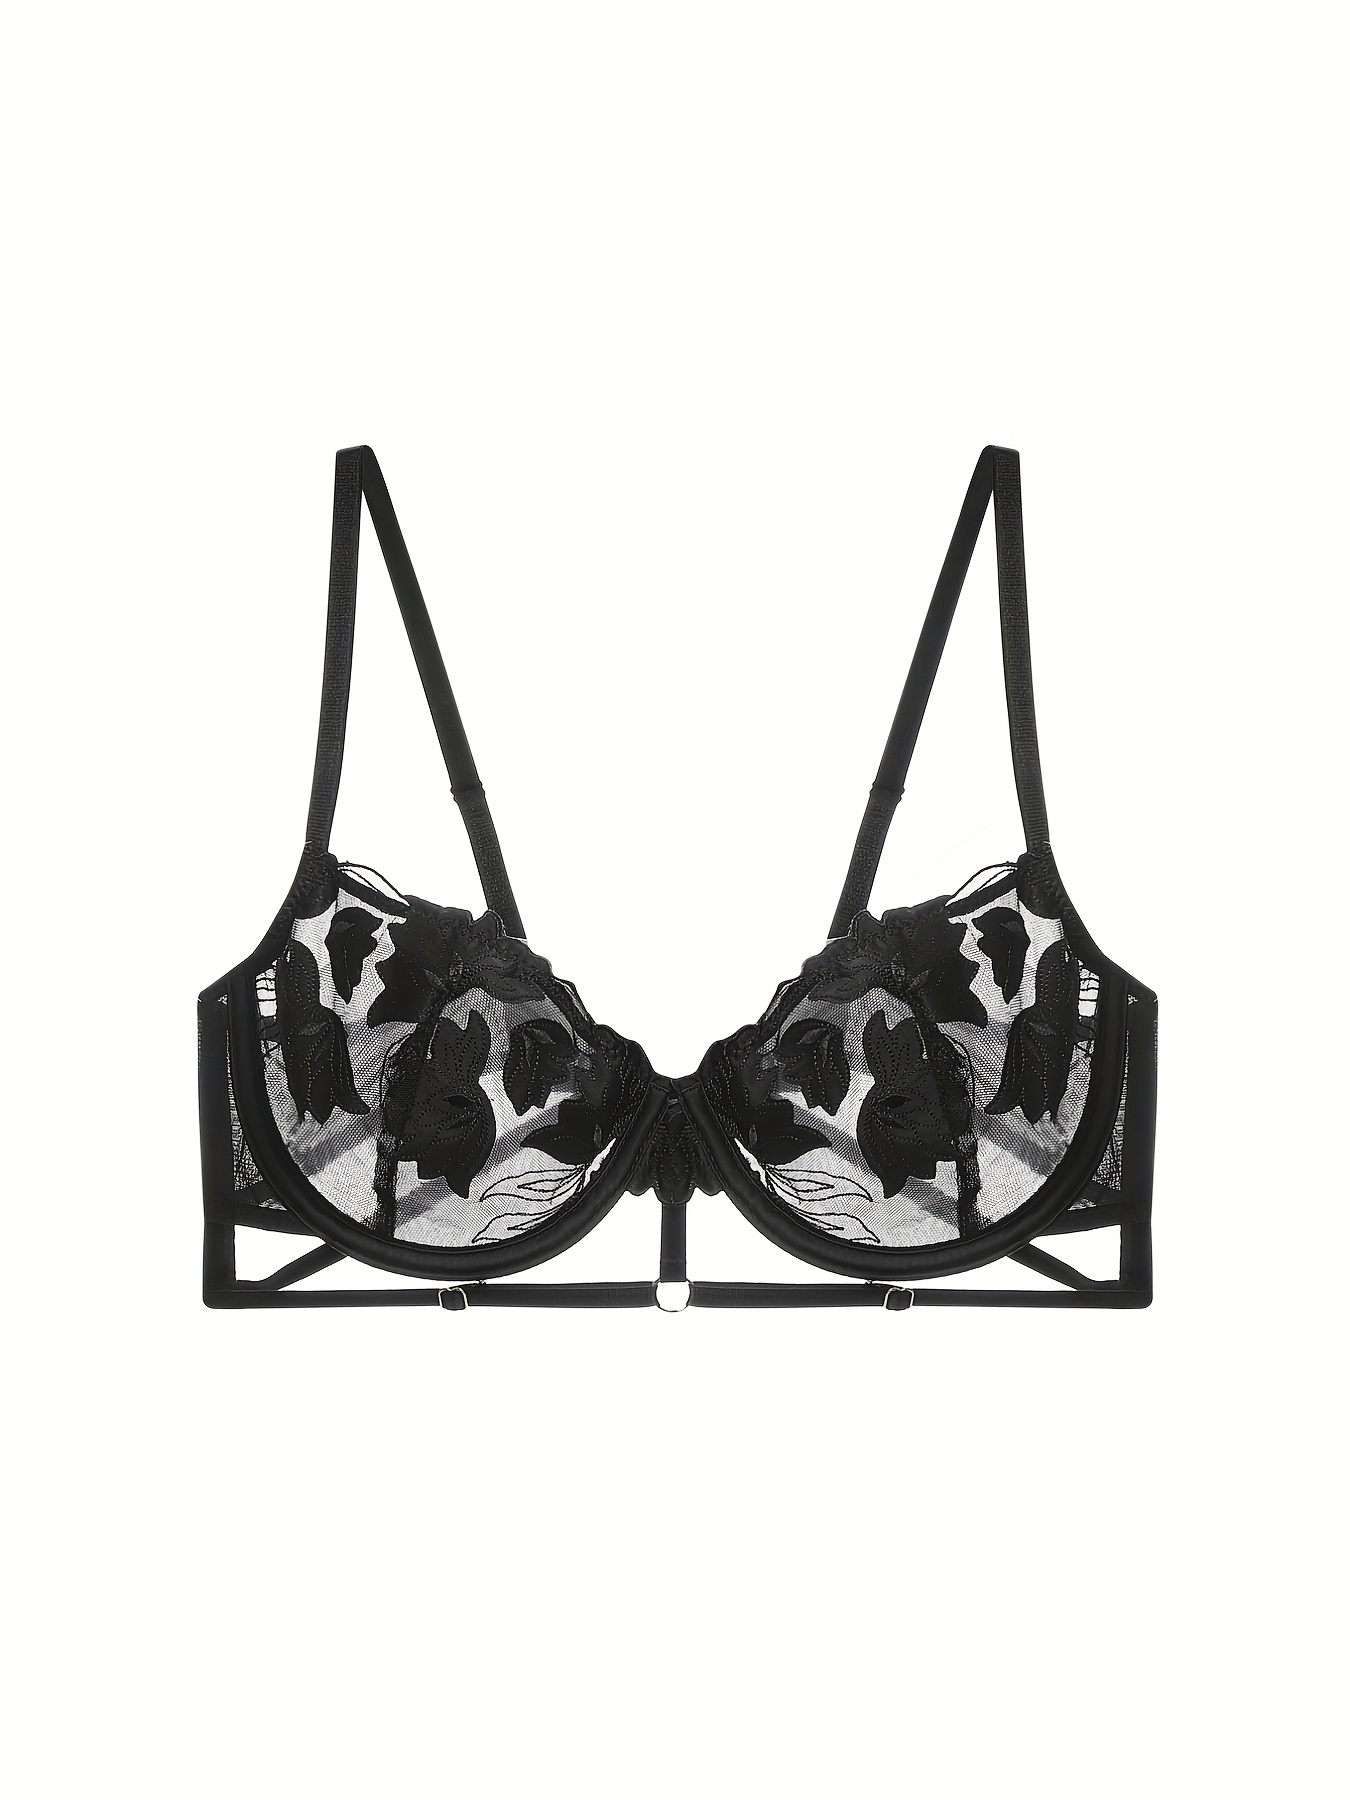 C cup unlined bra french style light weight women underwear sexy floral  lace bras breathable ultrathin soft deep v lingerie top